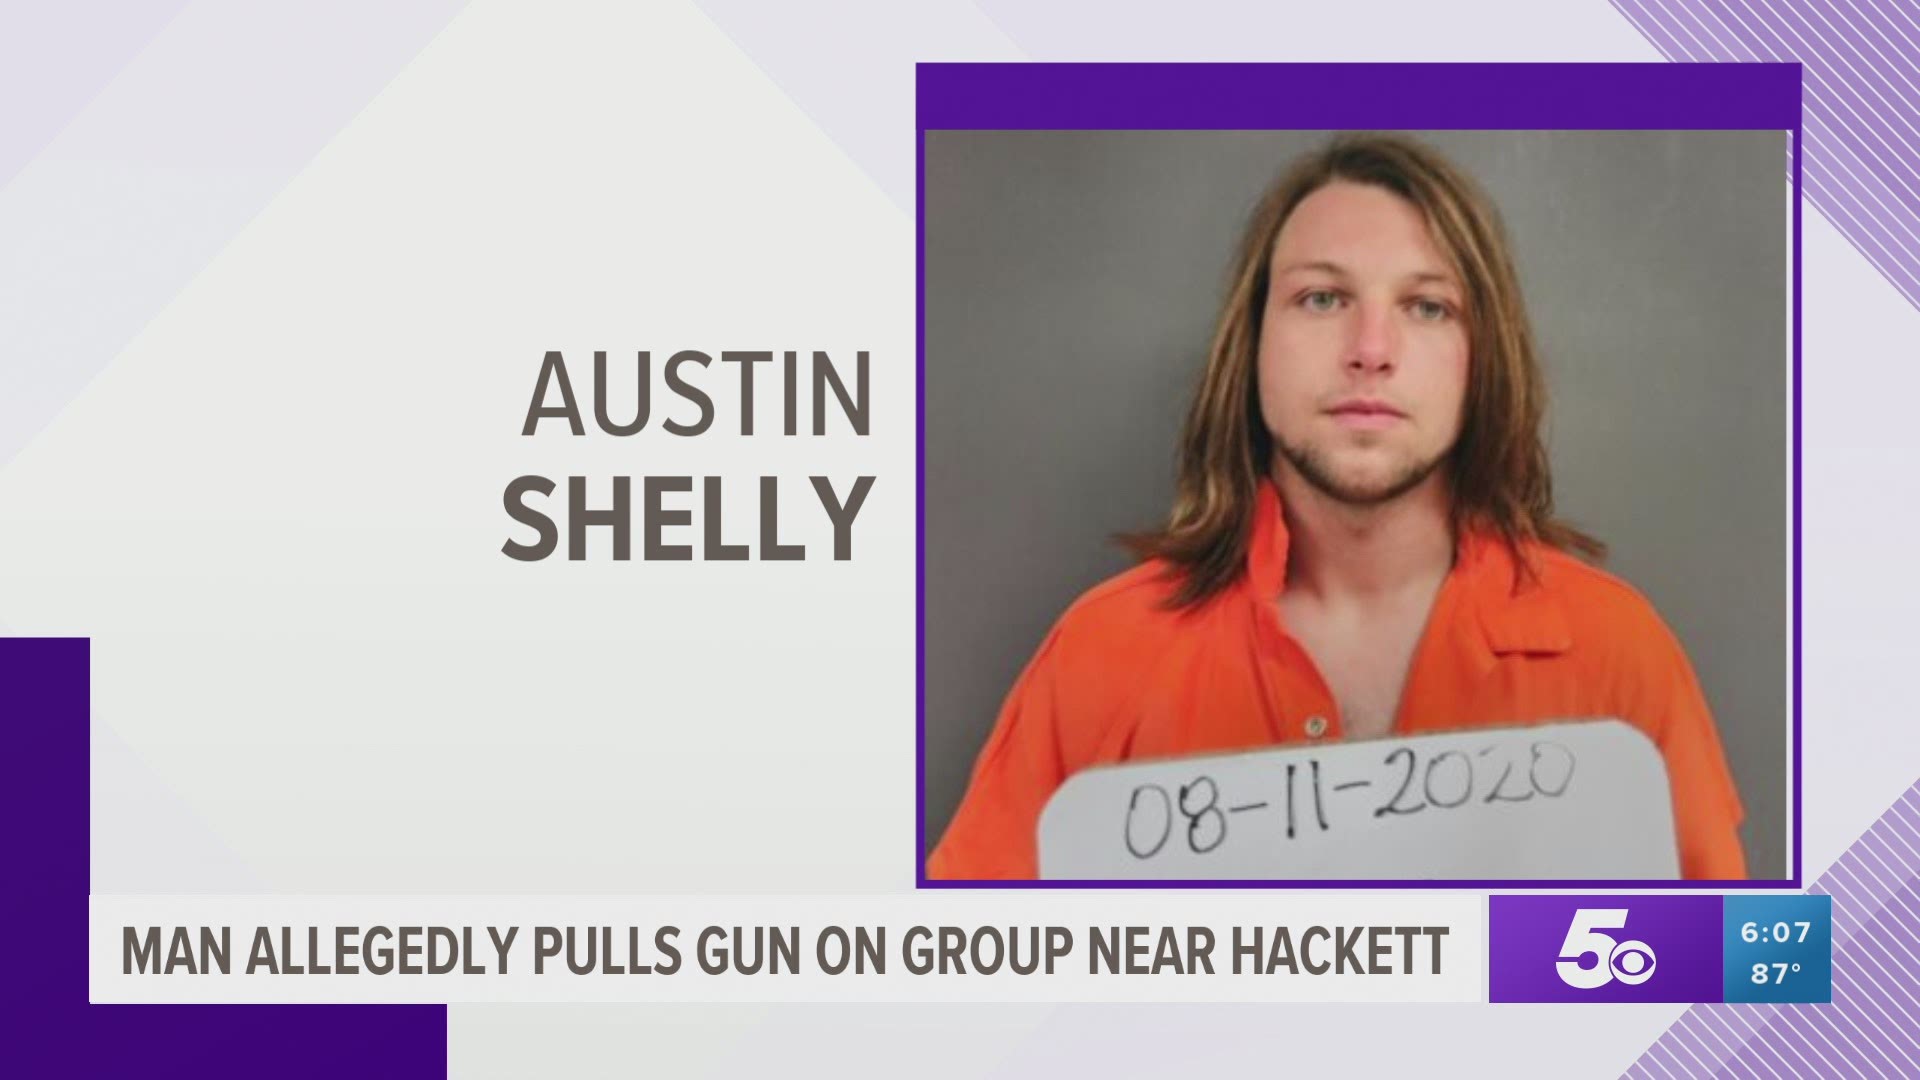 21-year-old Austin Shelly of the Hackett area was arrested for Aggravated Assault. https://bit.ly/33SZwnT